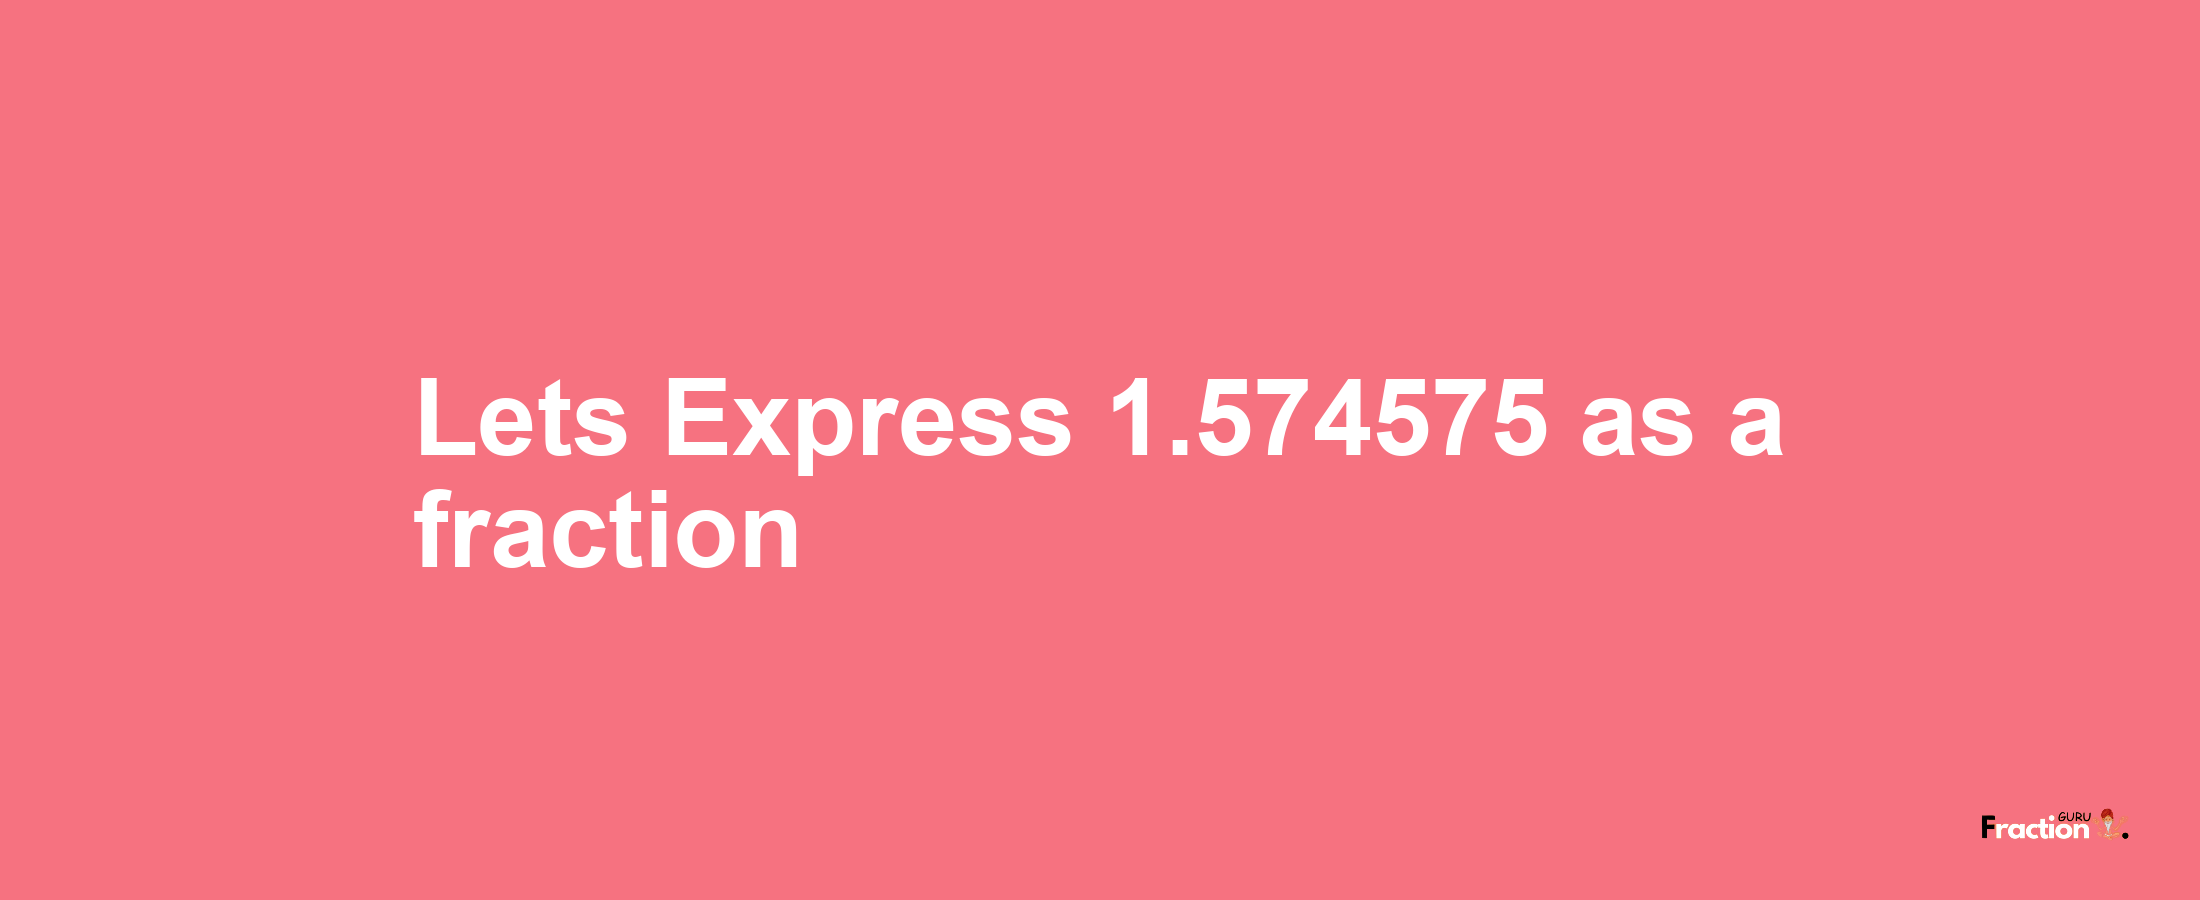 Lets Express 1.574575 as afraction